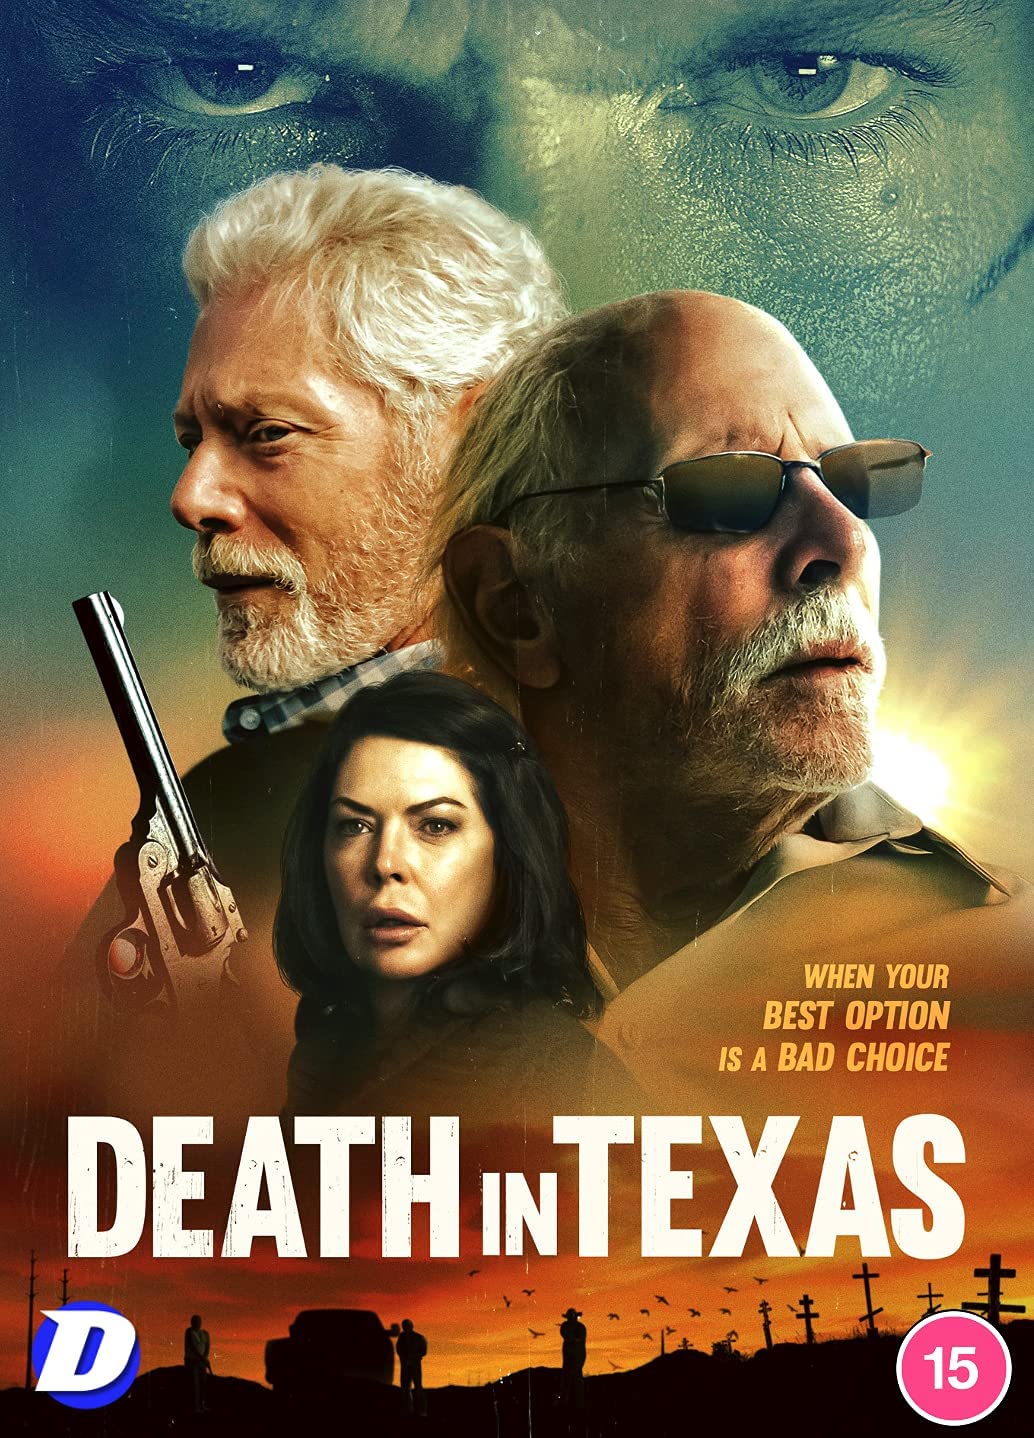 Death in Texas - Action/Drama [DVD]